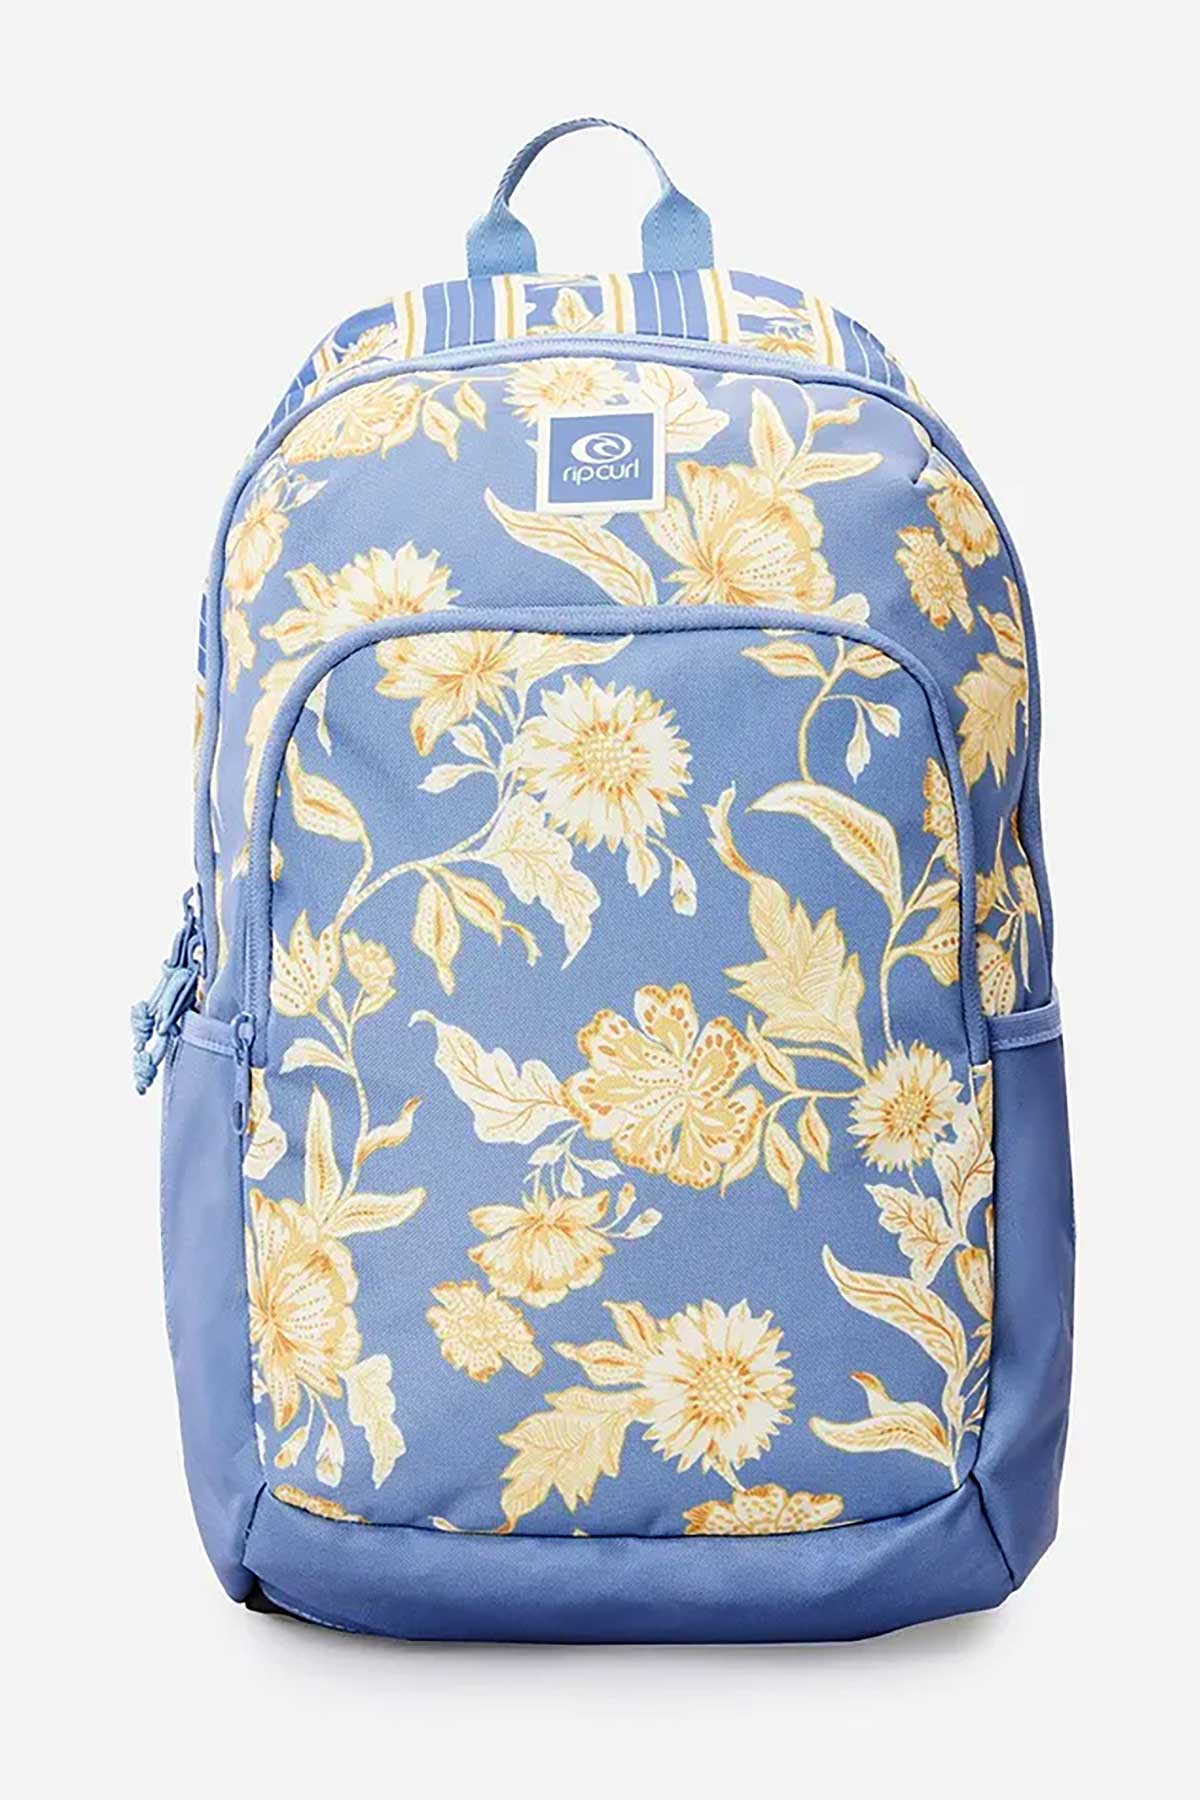 Rip Curl Backpack - Ozone 2.0 30 L, Blue floral front view.